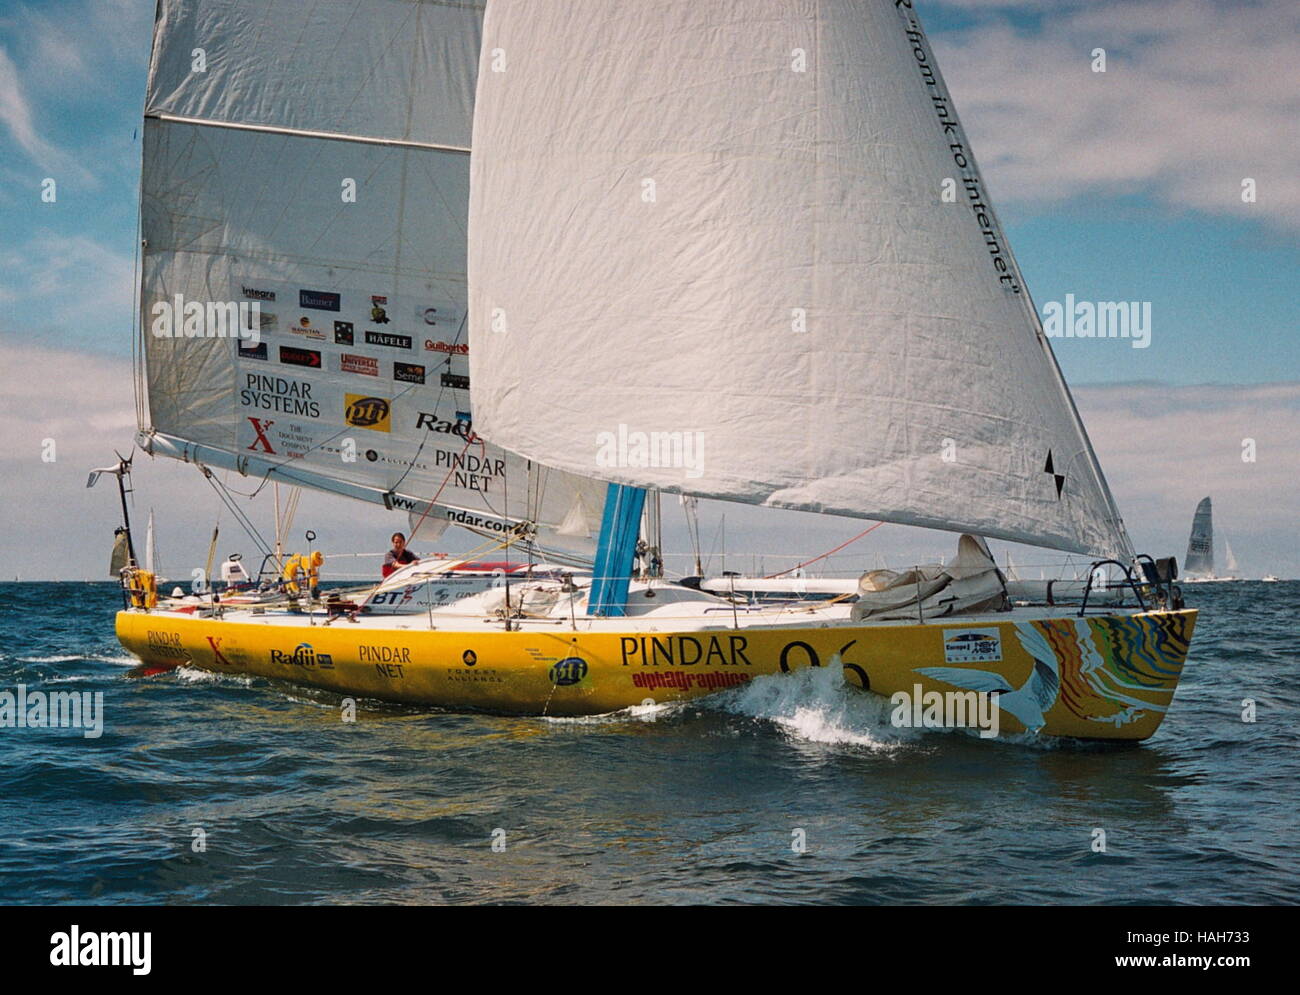 AJAXNETPHOTO. 4TH JUNE, 2000. PLYMOUTH, ENGLAND. - EUROPE 1 NEW MAN STAR TRANSAT YACHT RACE -  YACHT PINDAR SKIPPERED BY EMMA RICHARDS AT THE START OF THE EUROPE 1 NEW MAN STAR SINGLE HANDED TRANSATLANTIC RACE.  PHOTO:TONY CARNEY/ACME/AJAX  REF:TC4924 4 4A Stock Photo